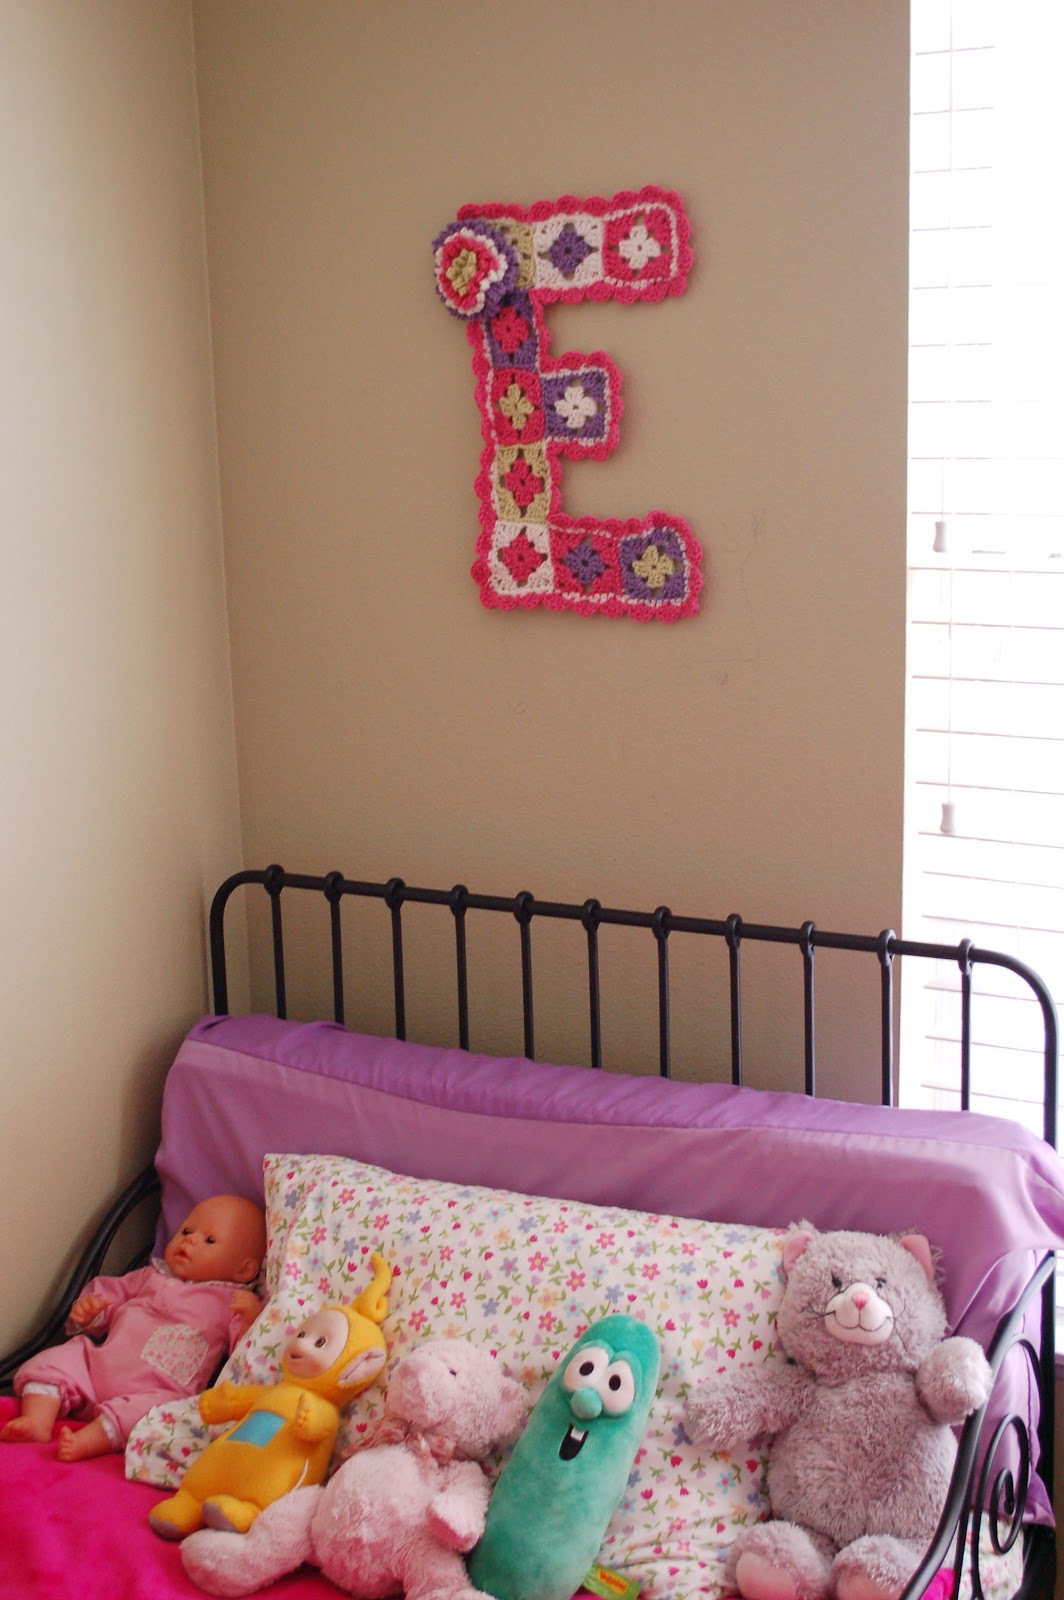 Alli Crafts: Free Pattern: Girl's Room Wall Decor Letter '